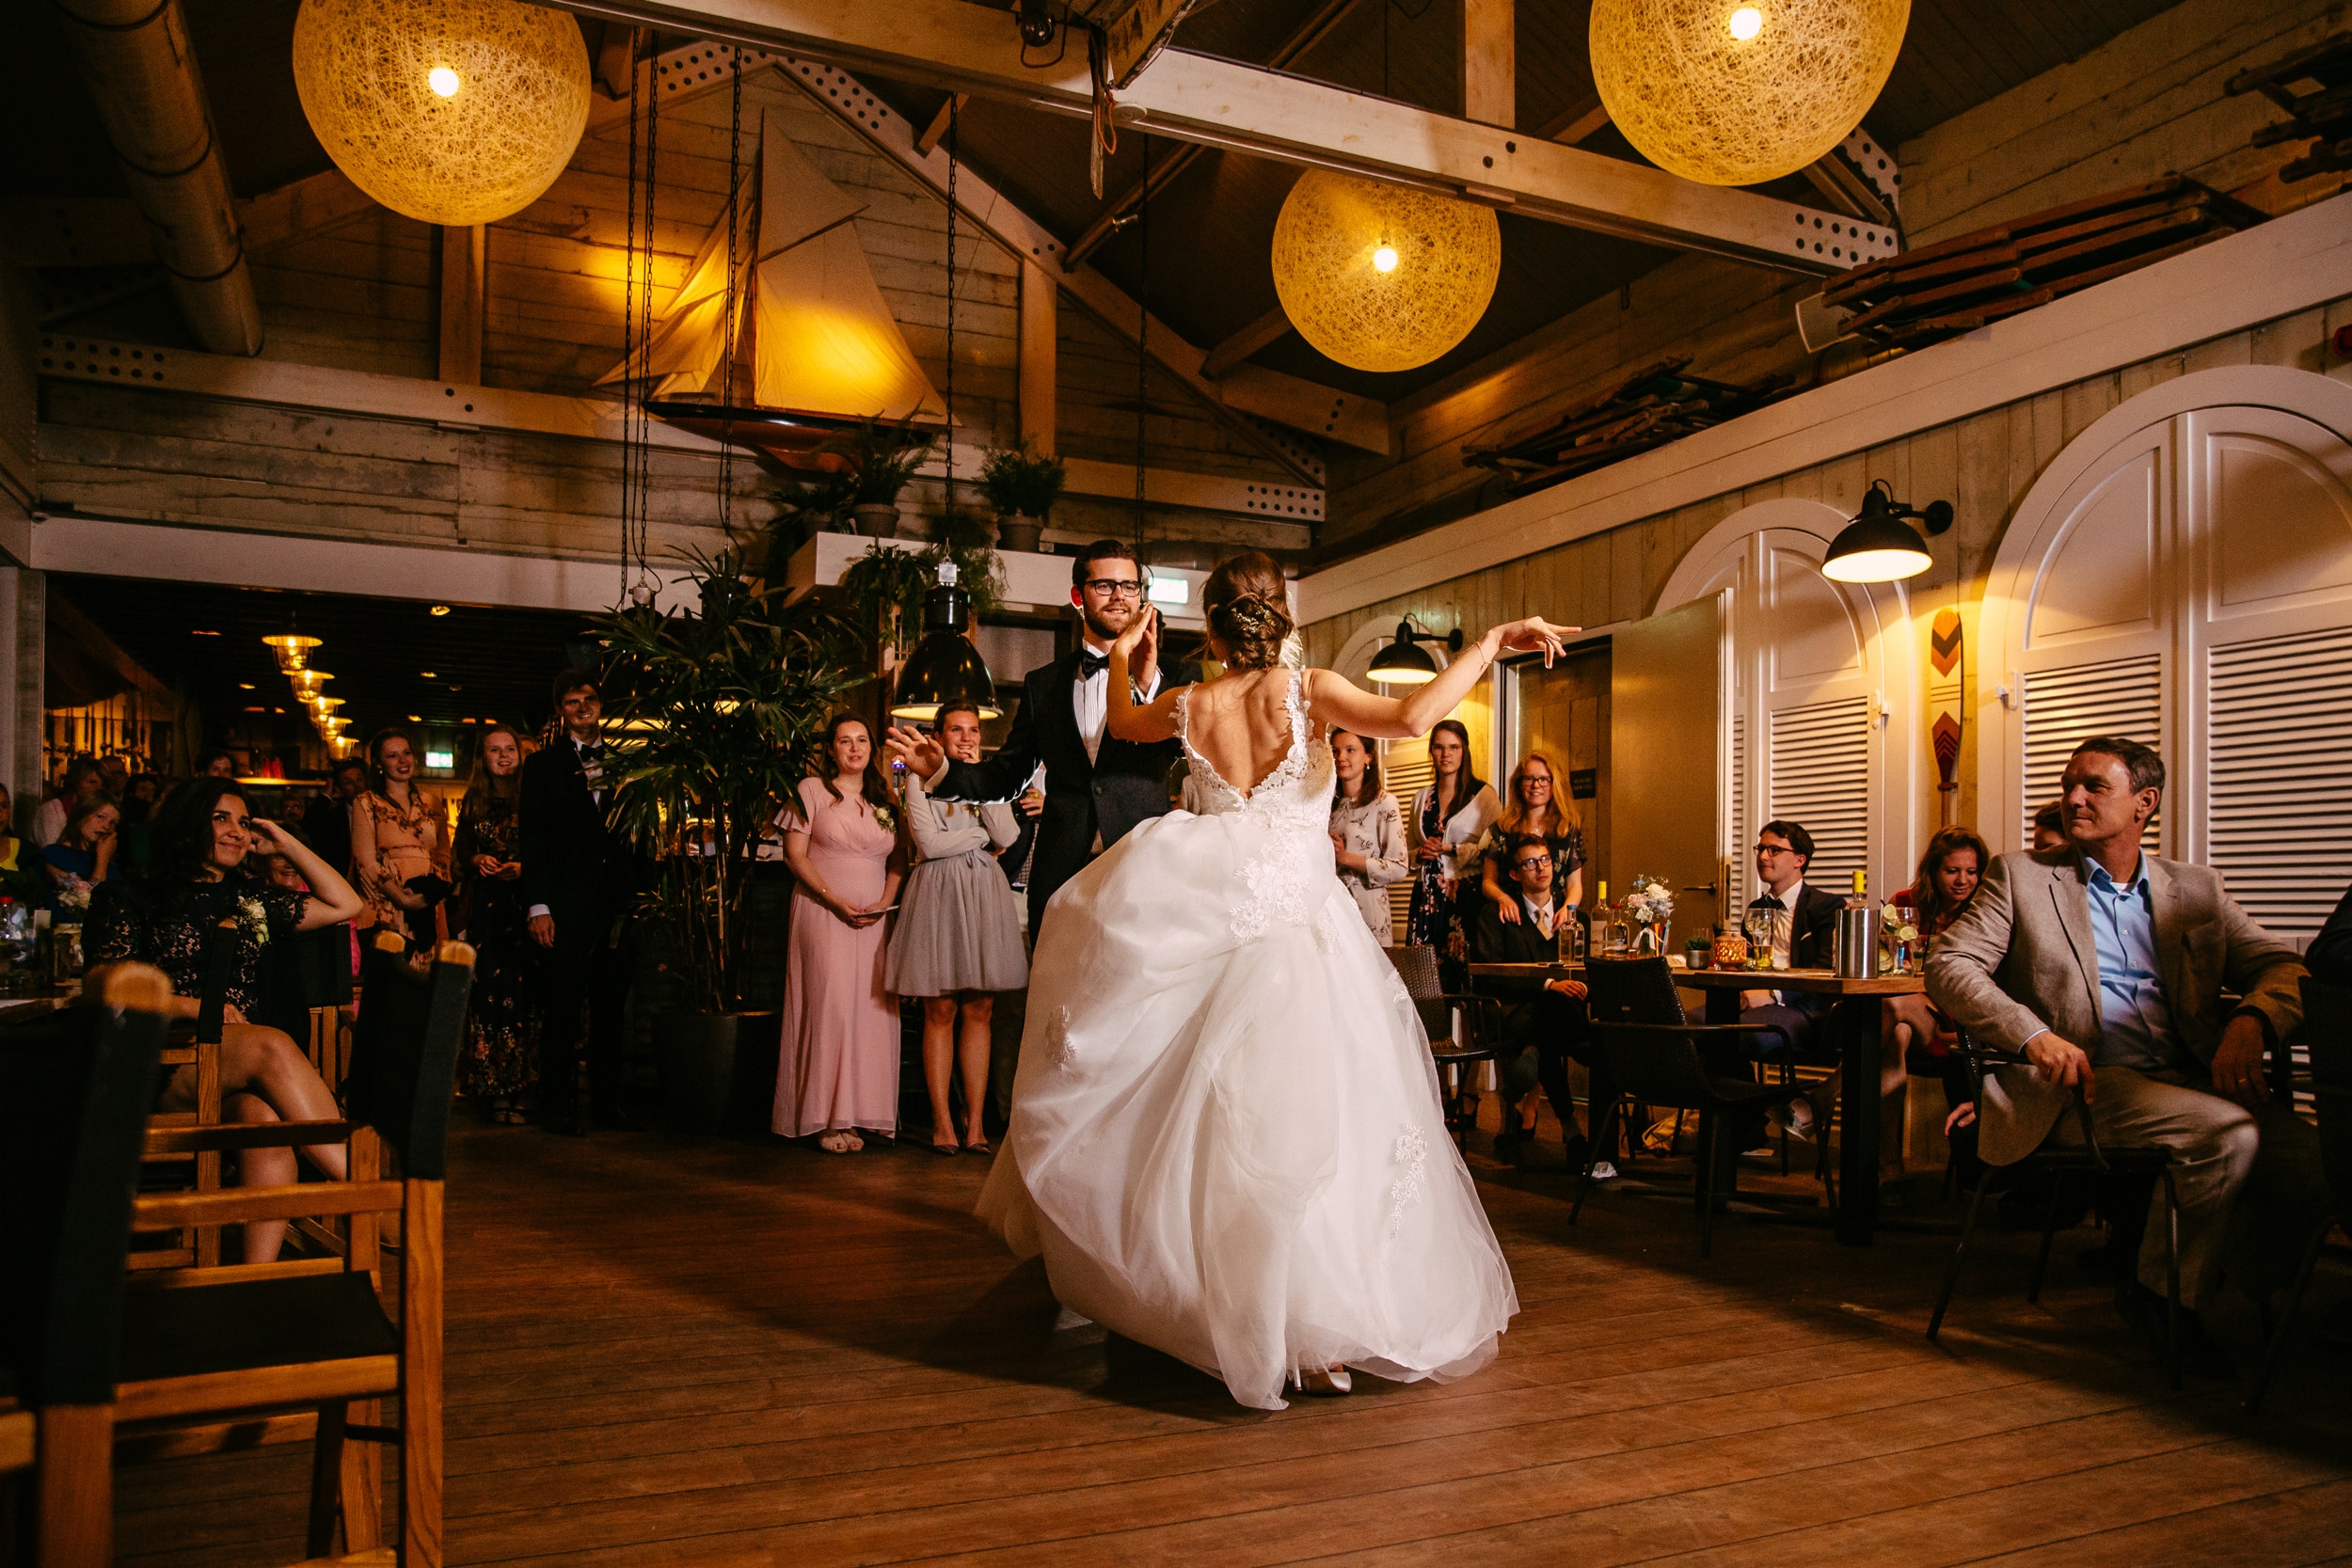 A bride and groom gracefully performing their opening dance to the tune of romantic songs during their wedding reception.